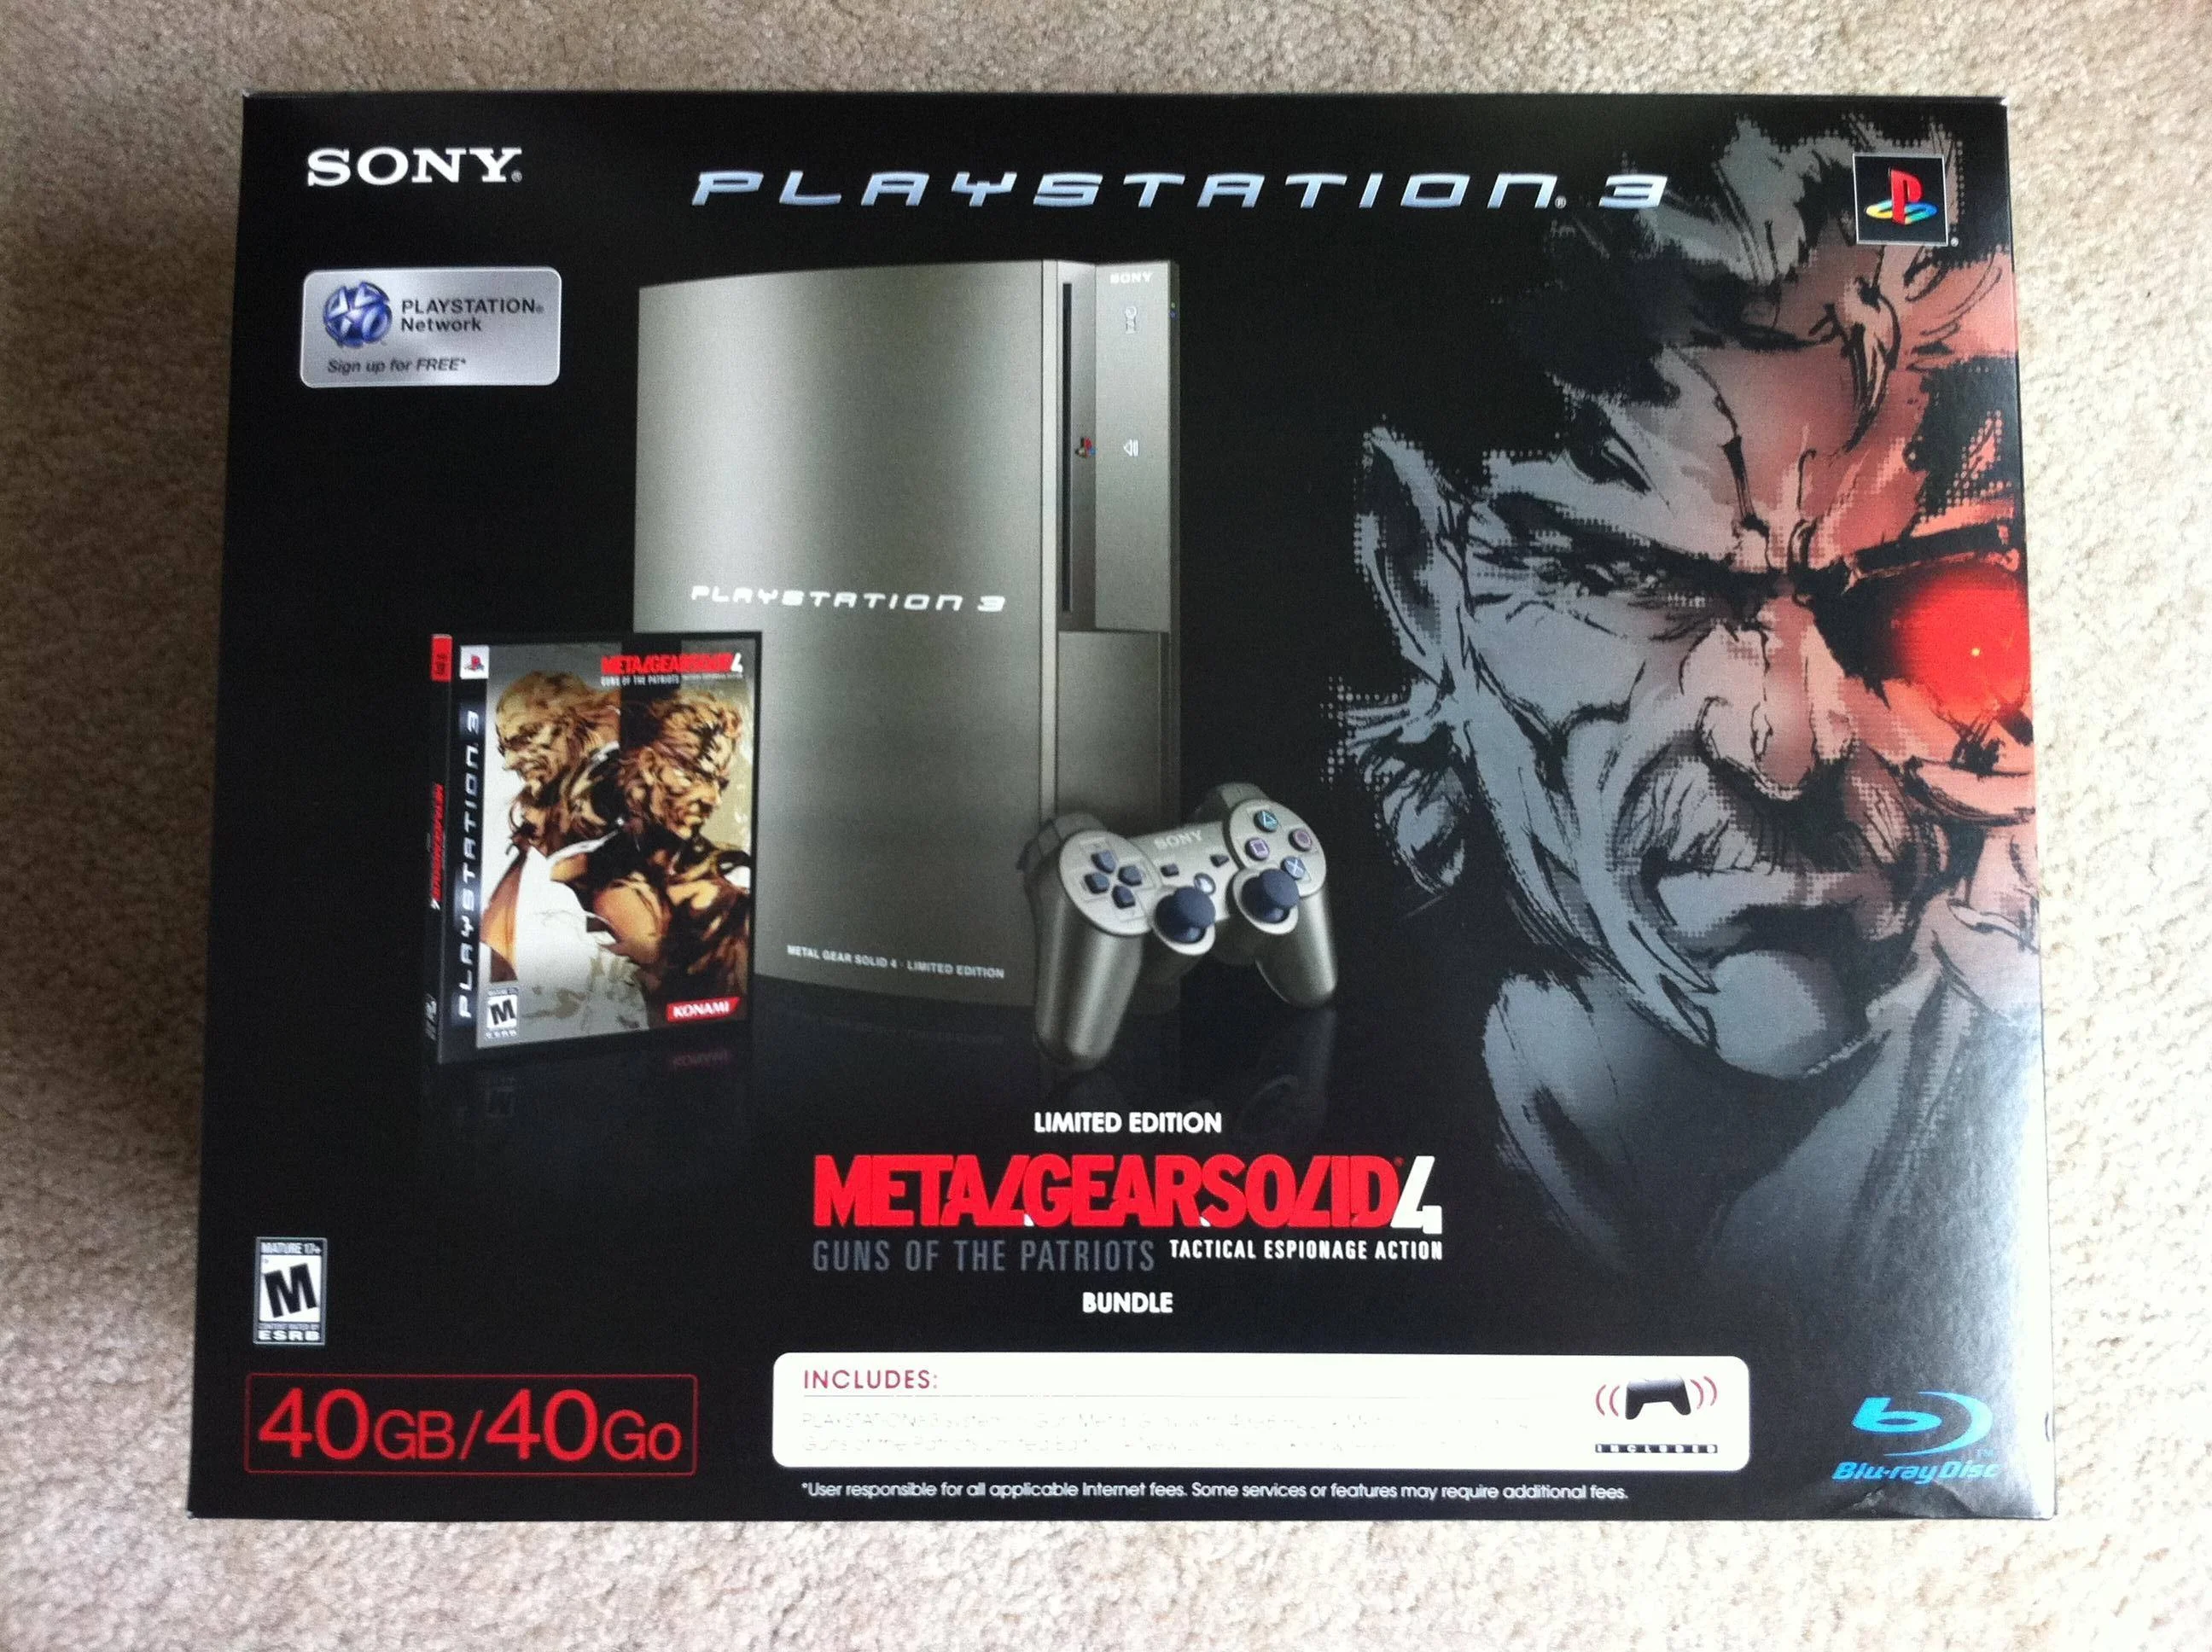 Ps3 режим. Metal Gear Limited Edition ps3. Metal Gear Solid 4 ps3 Limited Edition. Ps3 Slim Limited Edition. Sony PLAYSTATION 3 Metal Gear Solid Limited Edition.